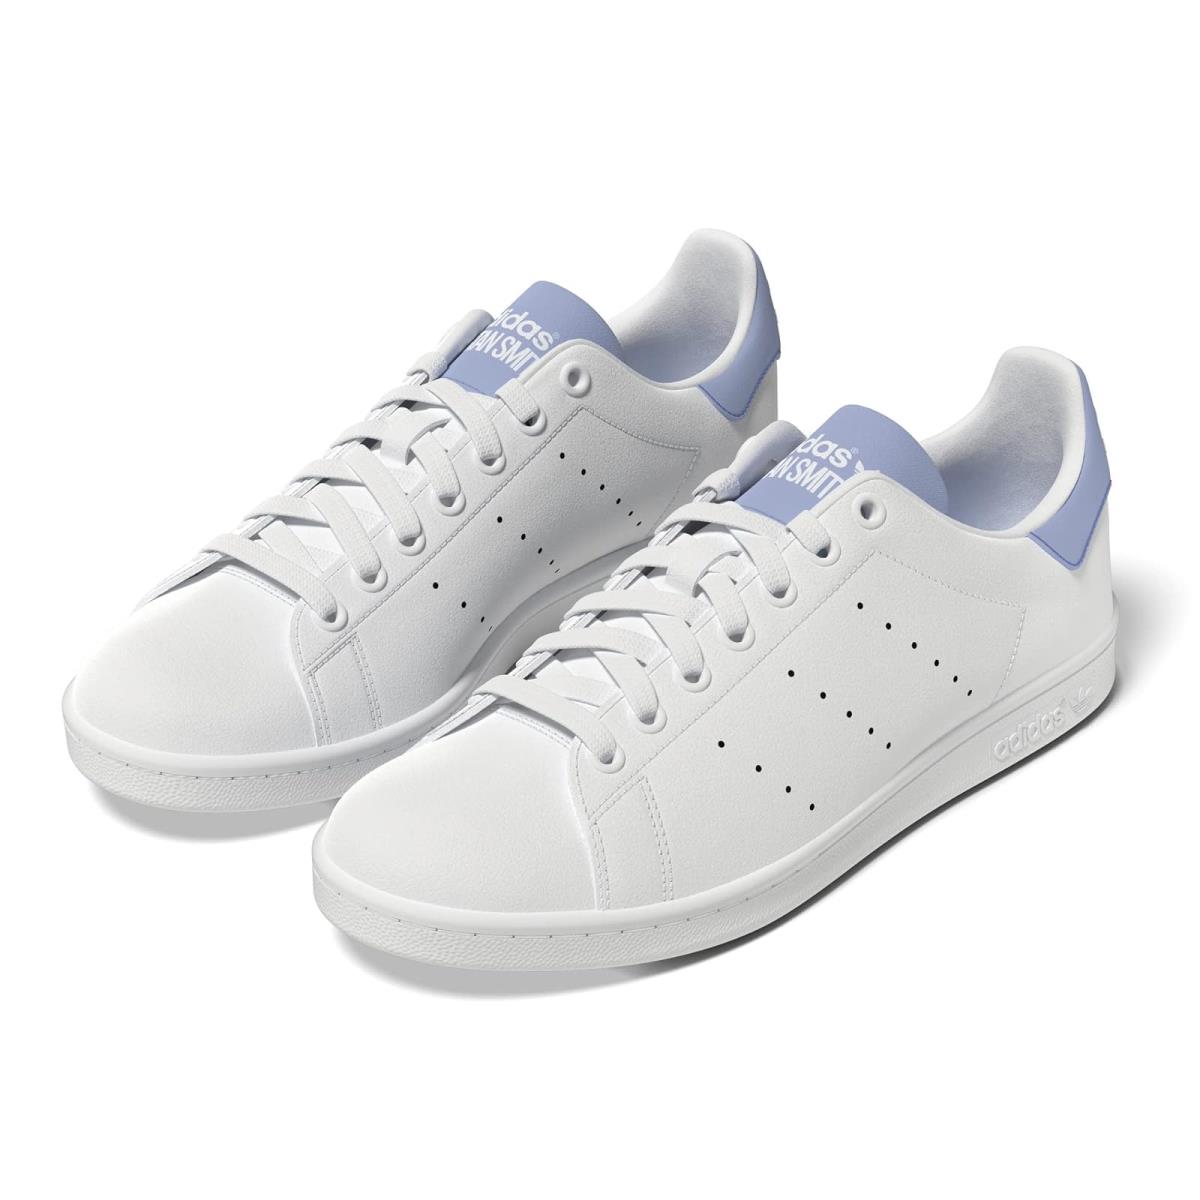 Man`s Sneakers Athletic Shoes Adidas Originals Stan Smith White/White/Blue Dawn